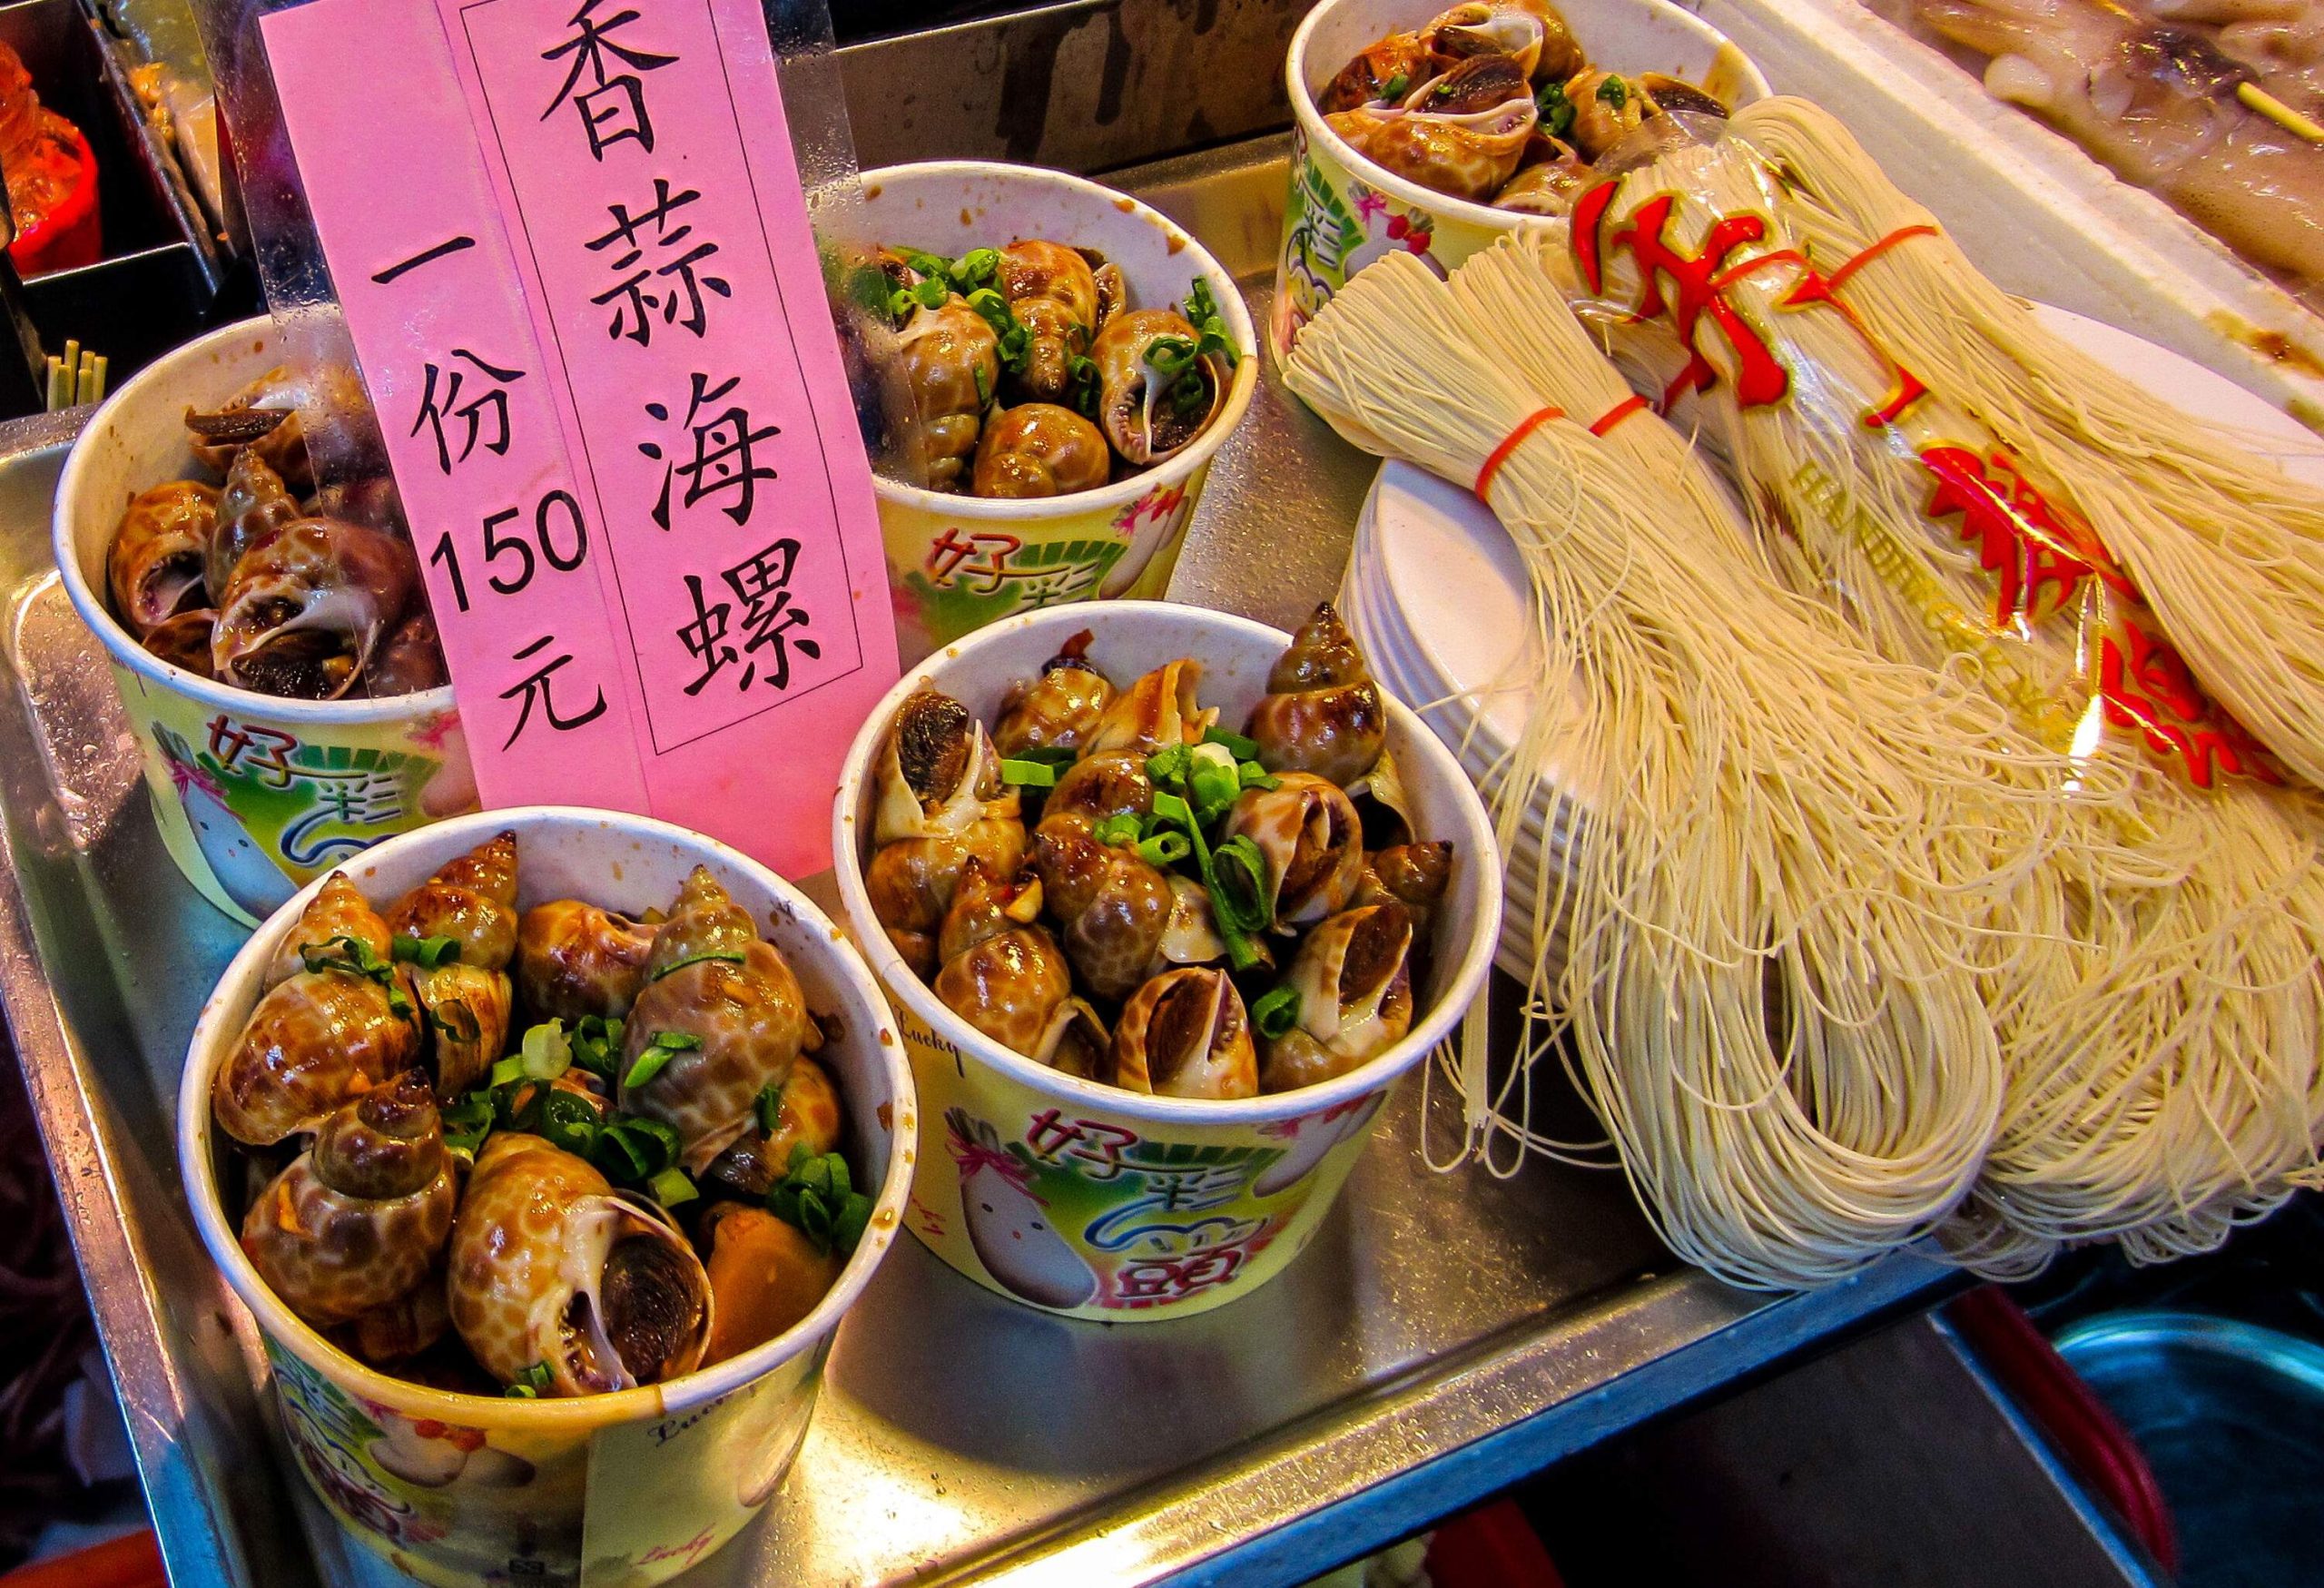 Display of enticing bowls filled with delectable snails and noodles, ready for sale, offering a unique and flavorful culinary experience.